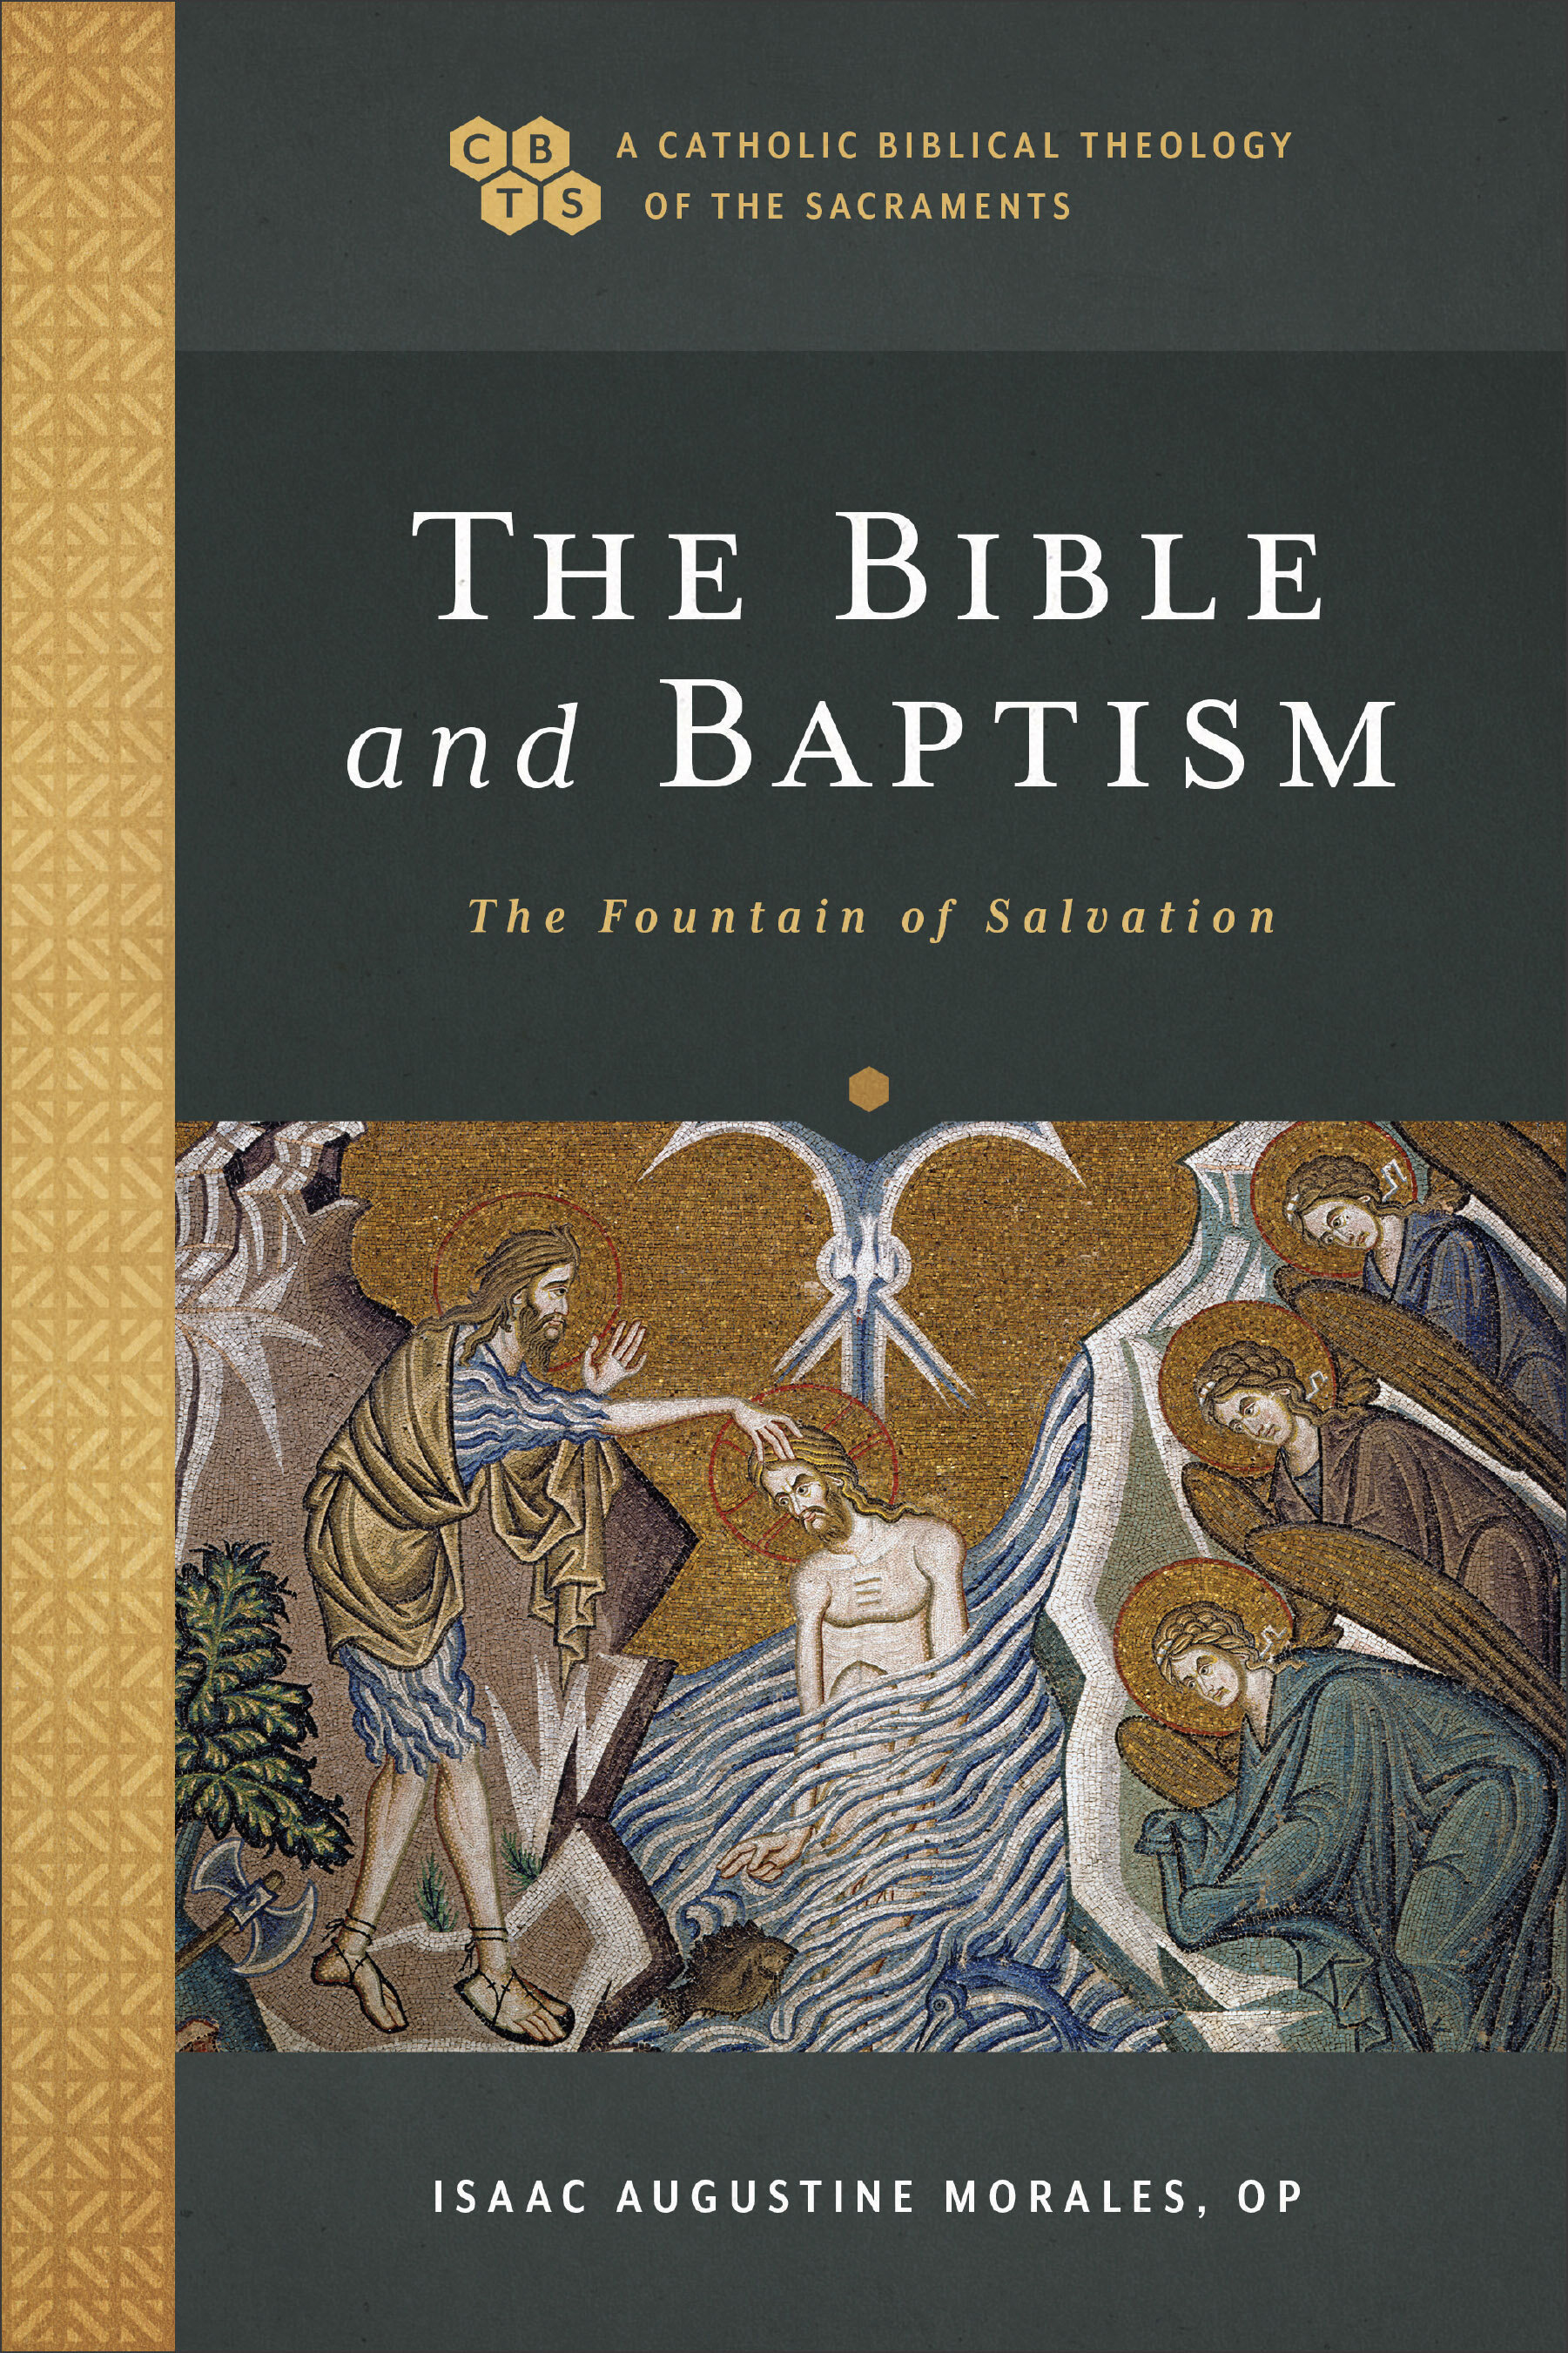 The Bible and Baptism: The Fountain of Salvation (A Catholic Biblical Theology of the Sacraments)